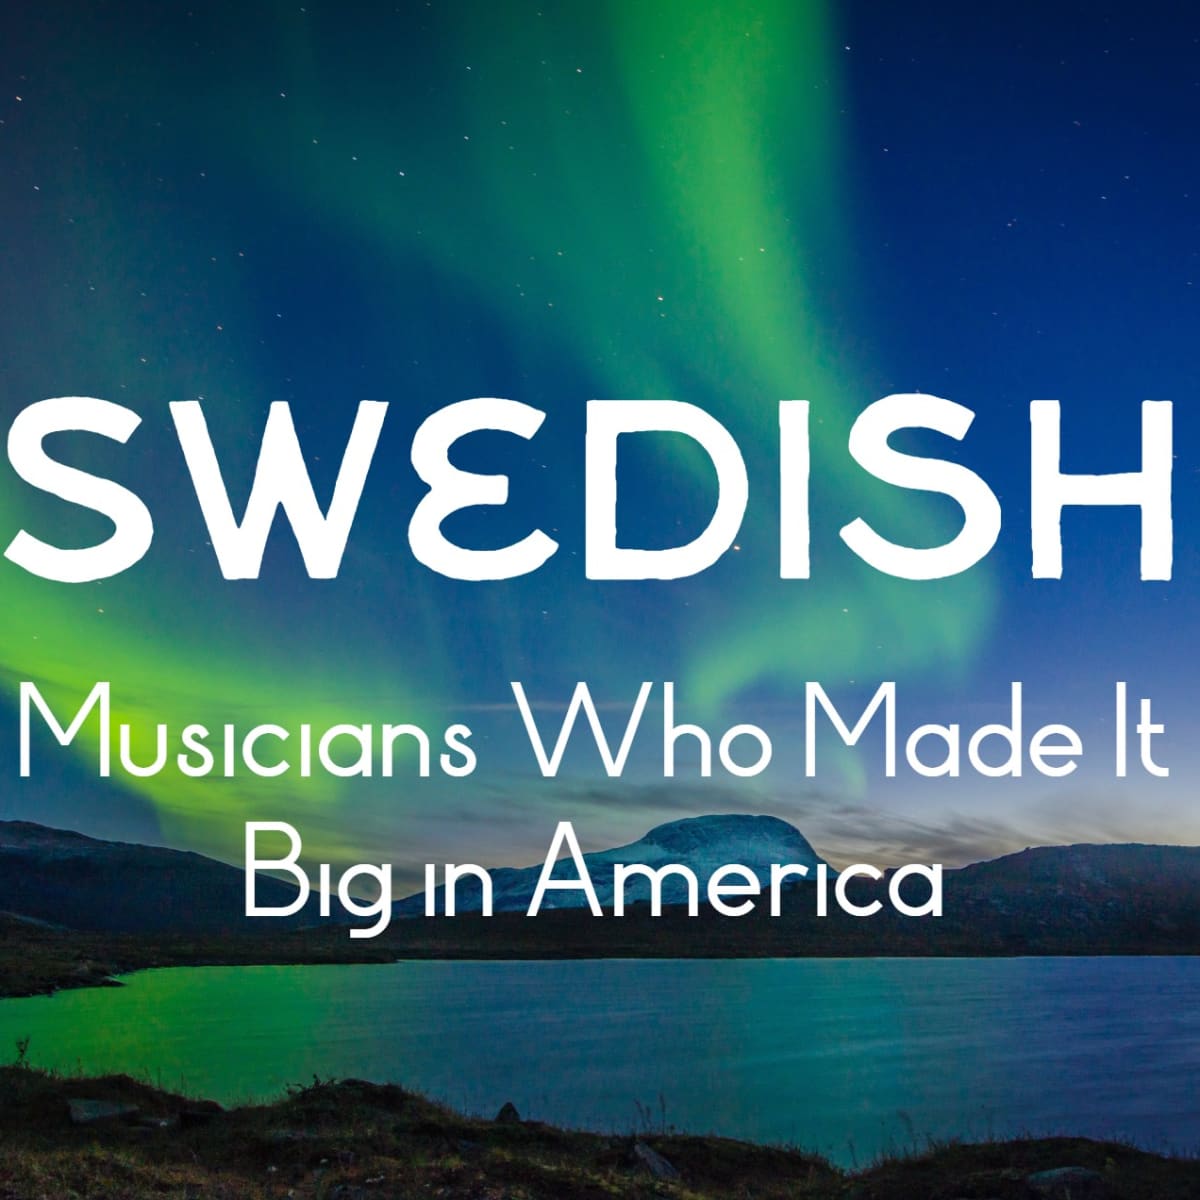 21 Swedish Musicians Who Made It in America - Spinditty